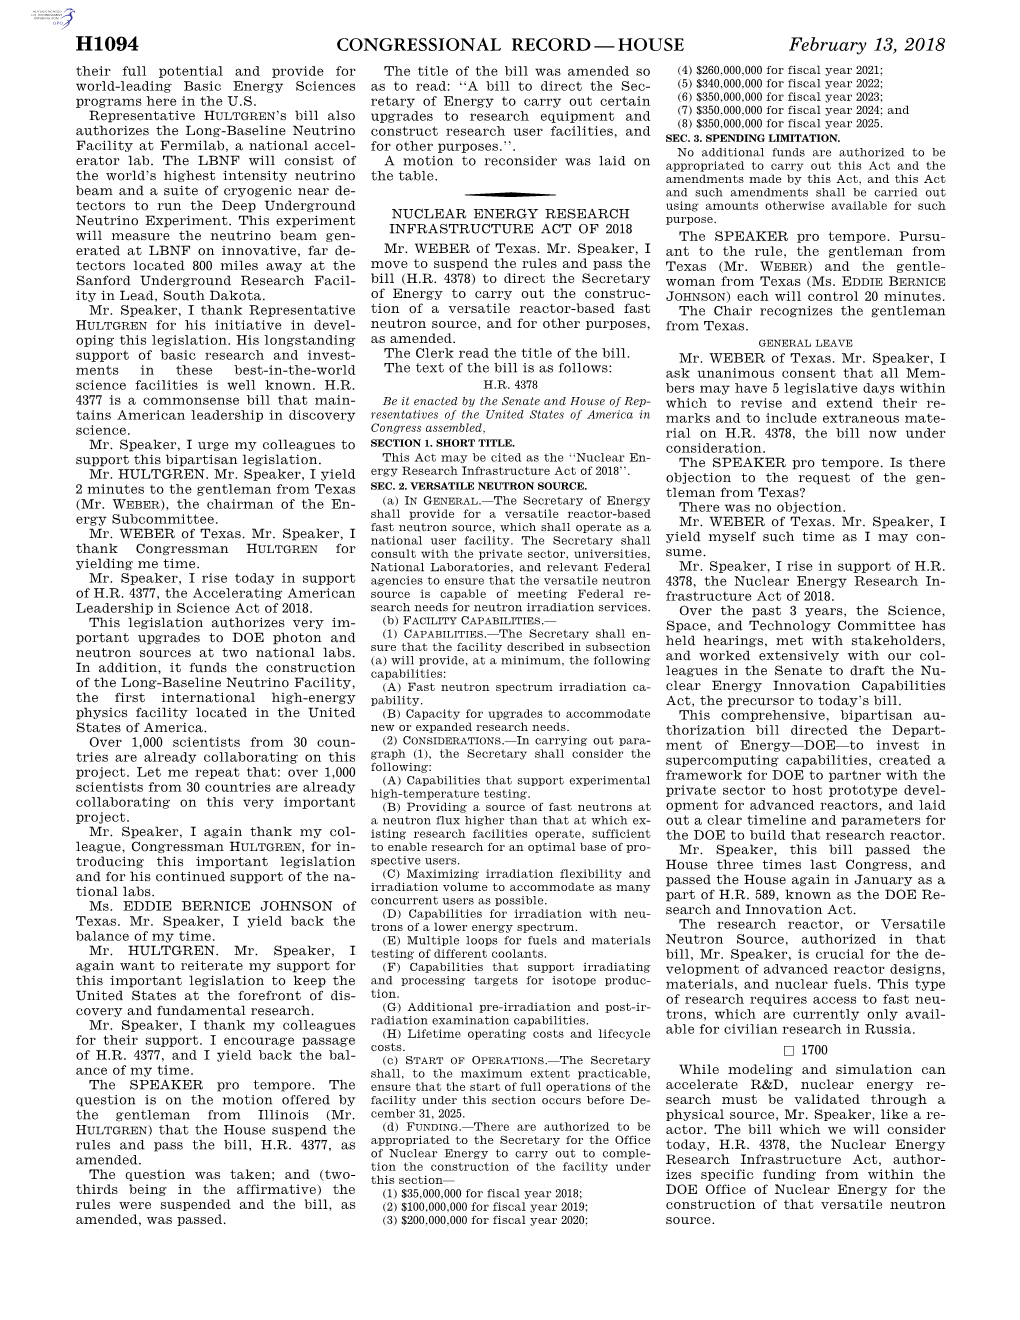 Congressional Record—House H1094